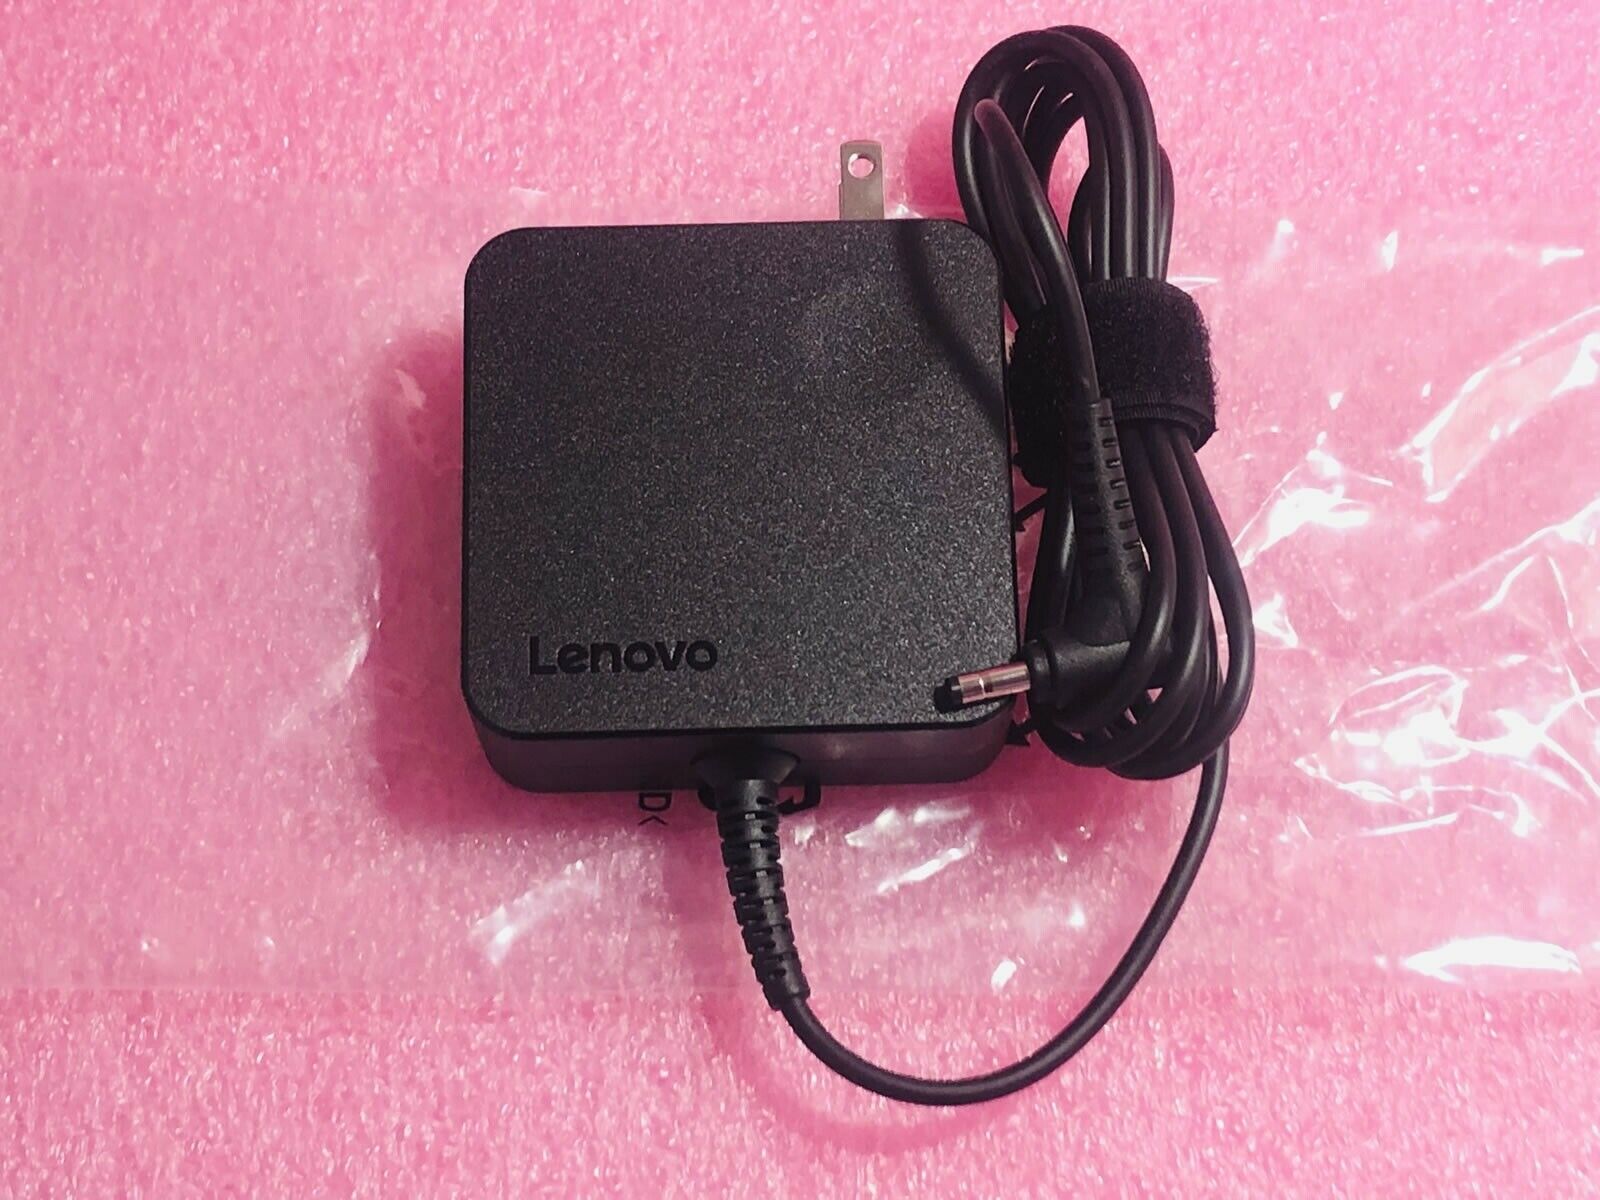 Genuine Lenovo 65W AC Power Laptop Charger Adapter IdeaPad S340 81N8005DUS Brand: Lenovo Type: Power Adapter Compati